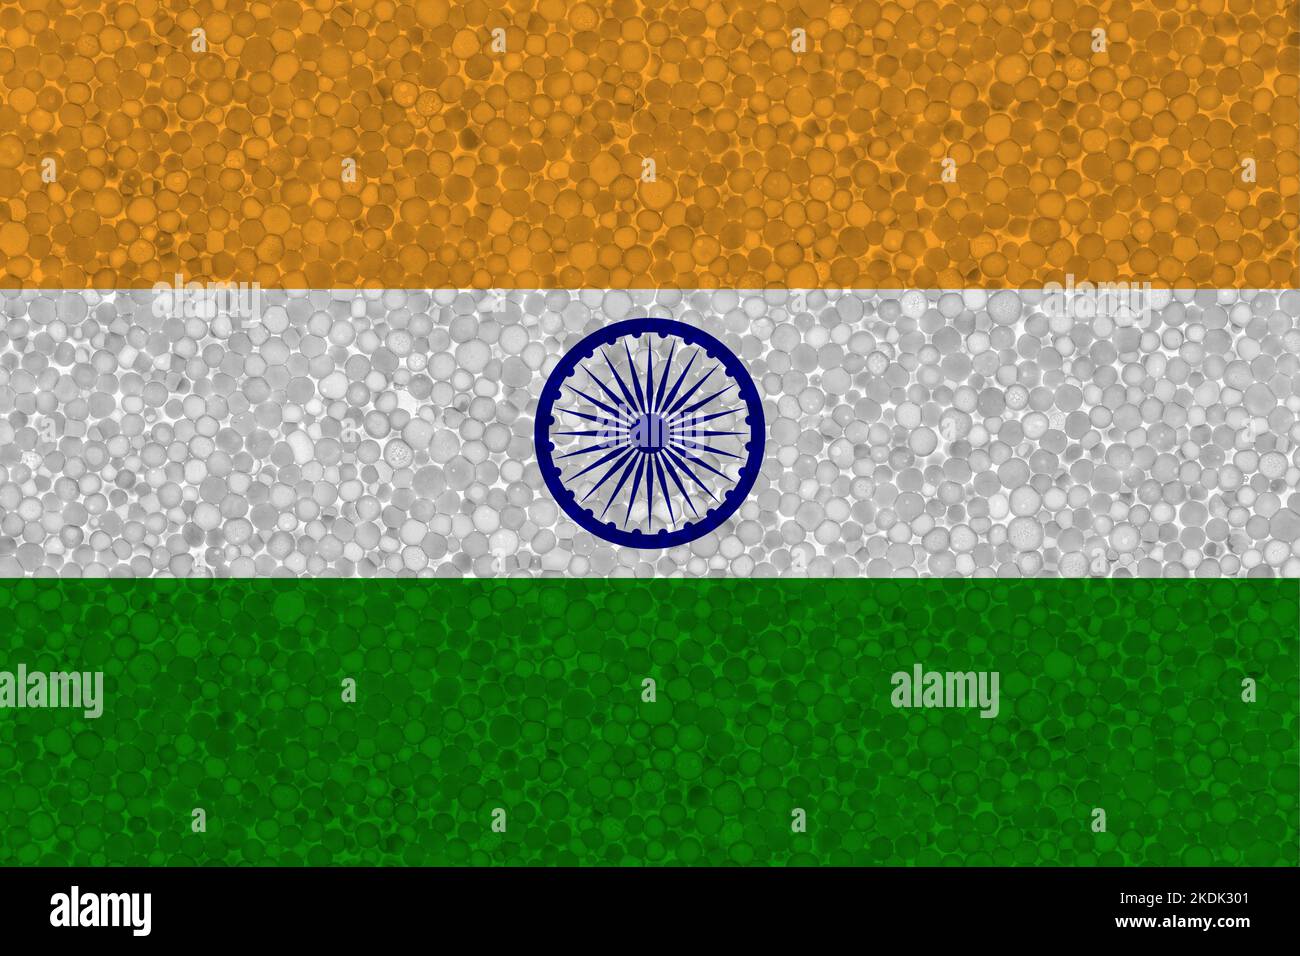 Flag of India on styrofoam texture. national flag painted on the surface of plastic foam Stock Photo